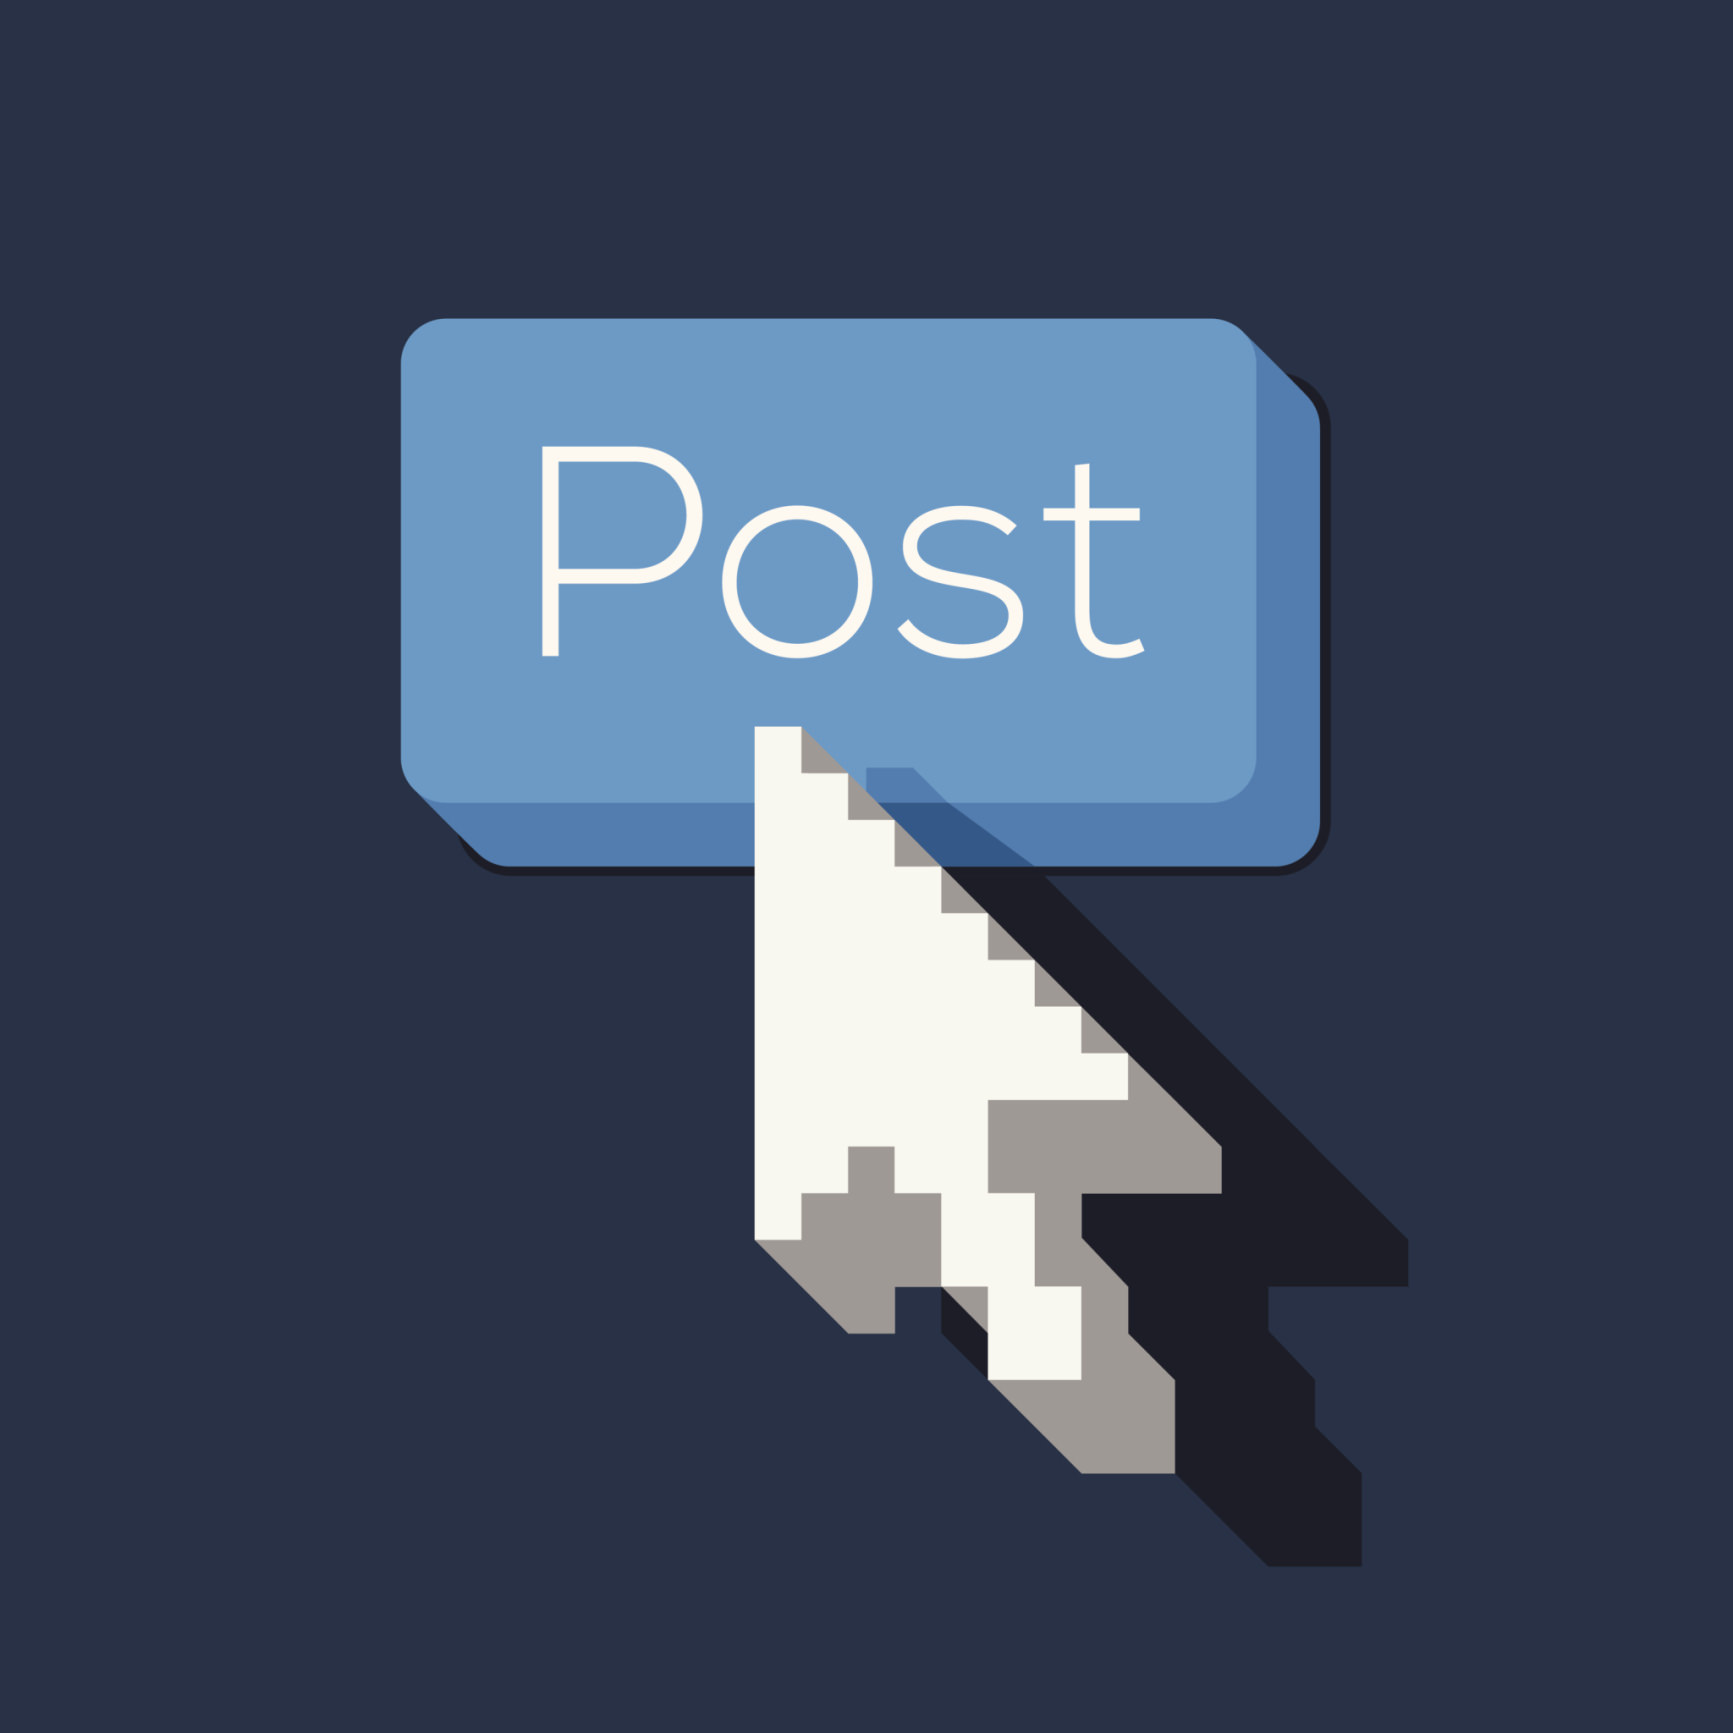 Post Button with Arrow Shaped Cursor